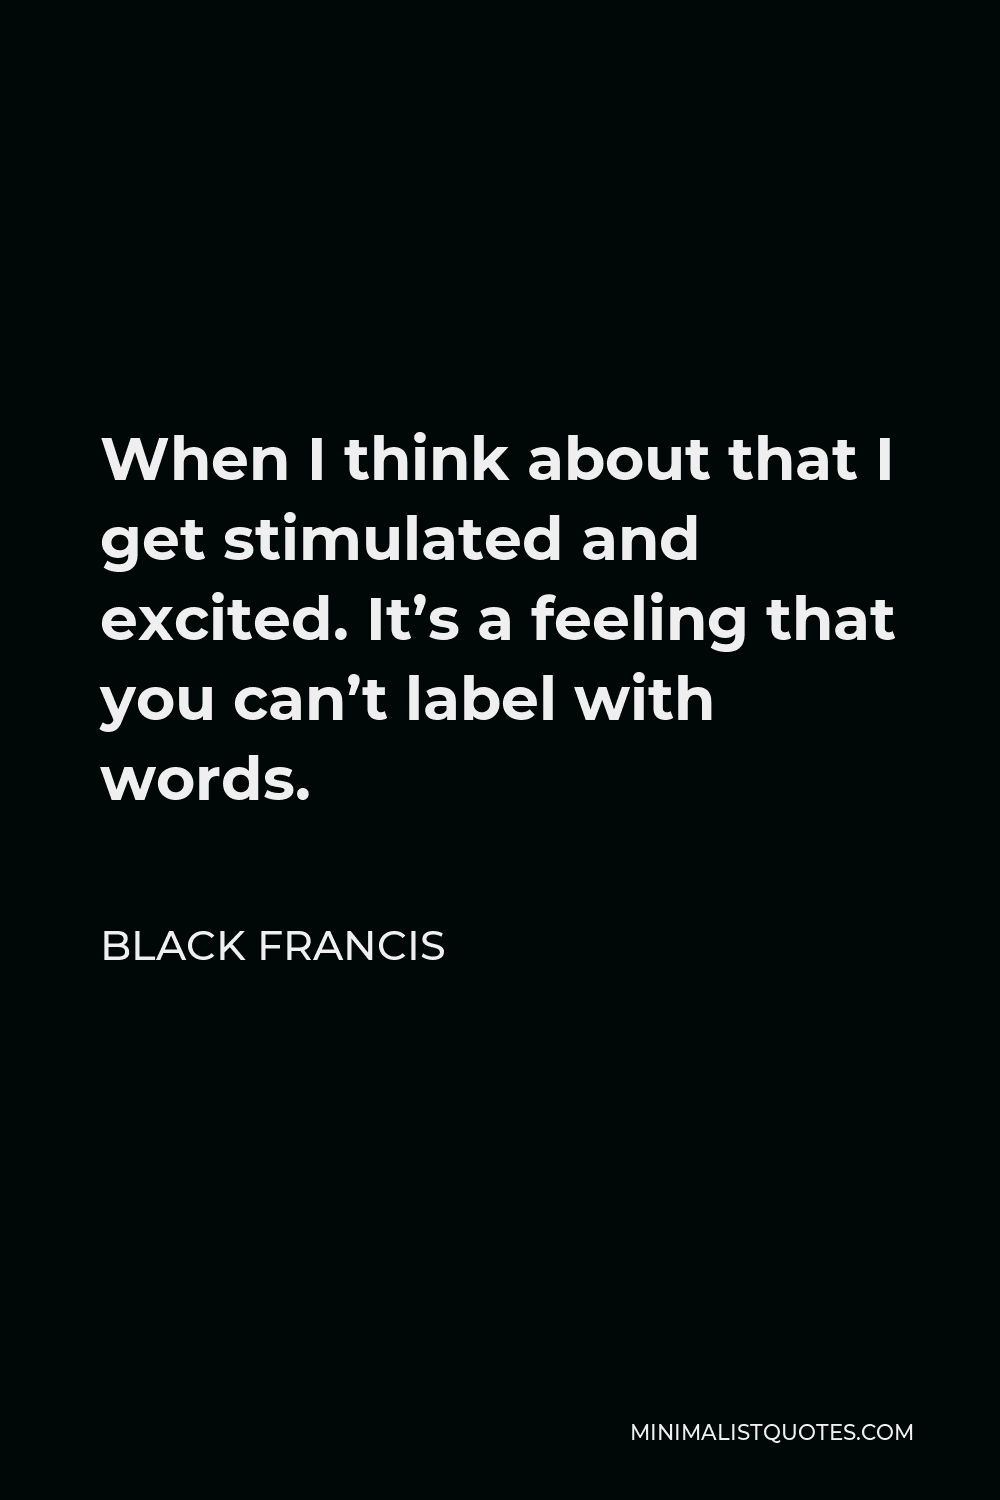 Black Francis Quote - When I think about that I get stimulated and excited. It’s a feeling that you can’t label with words.